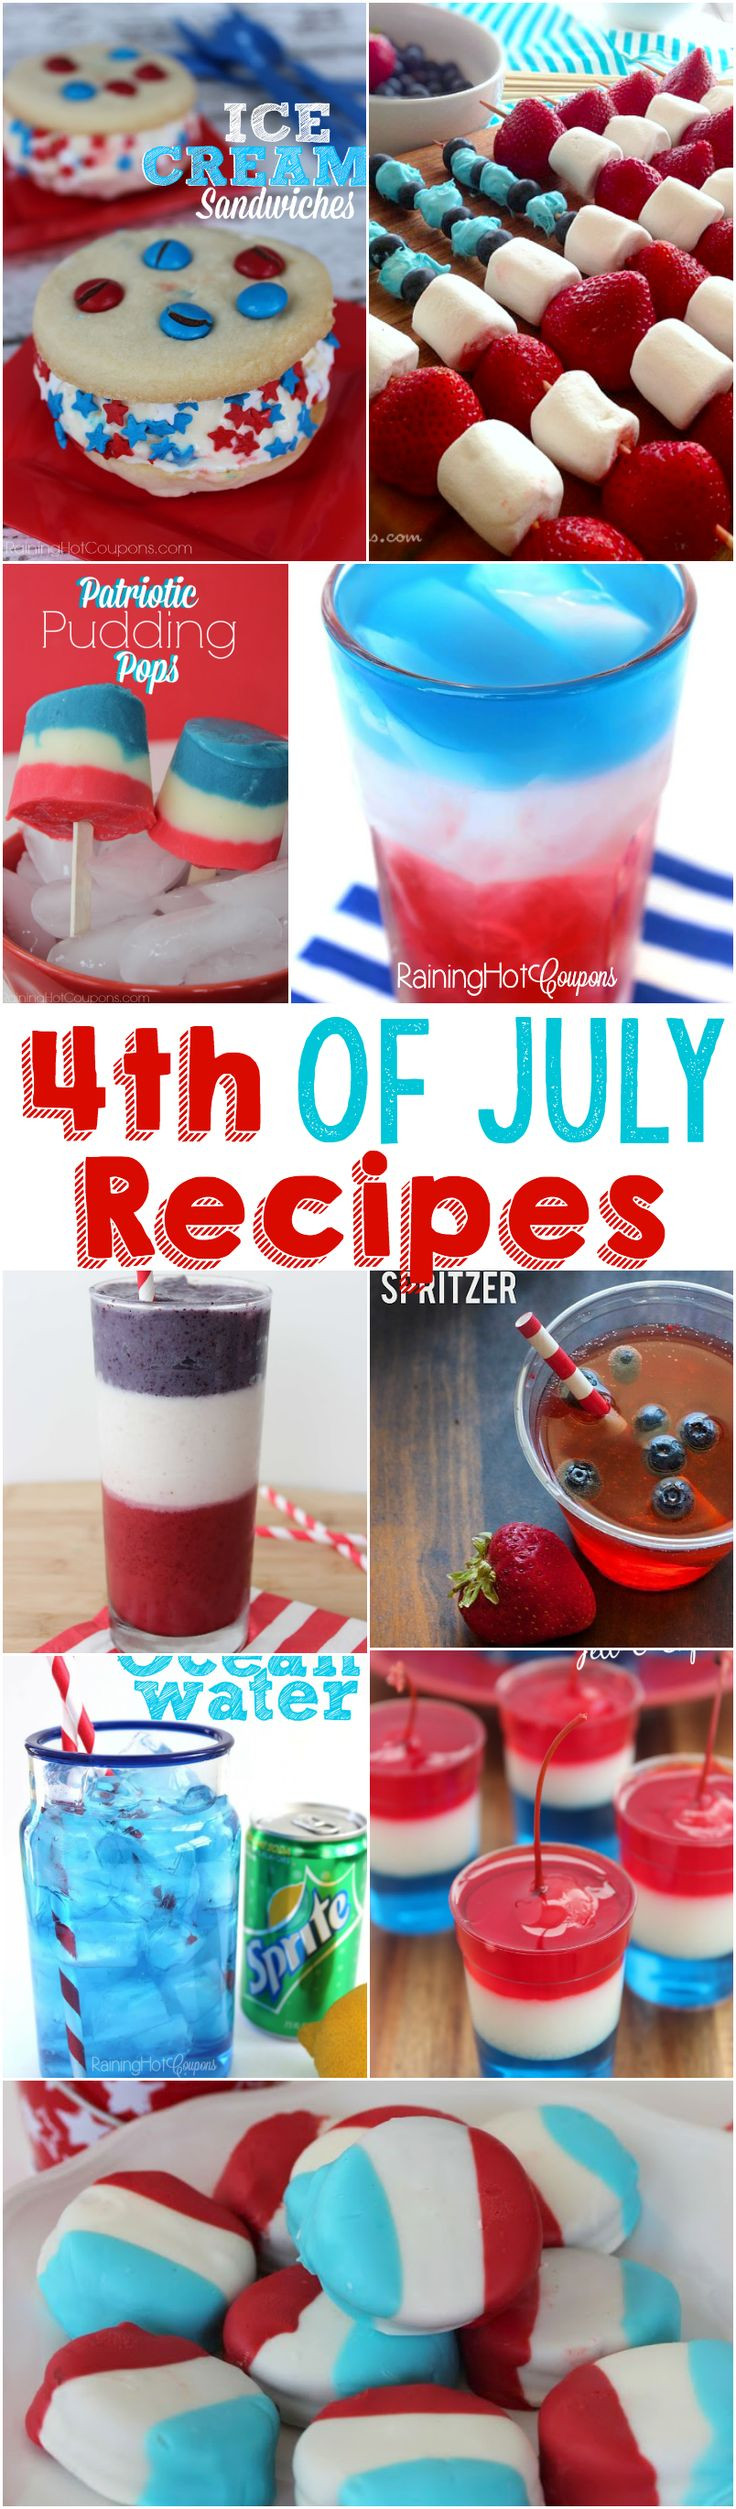 4th Of July Food Deals
 List of Ten 4th of July Recipes